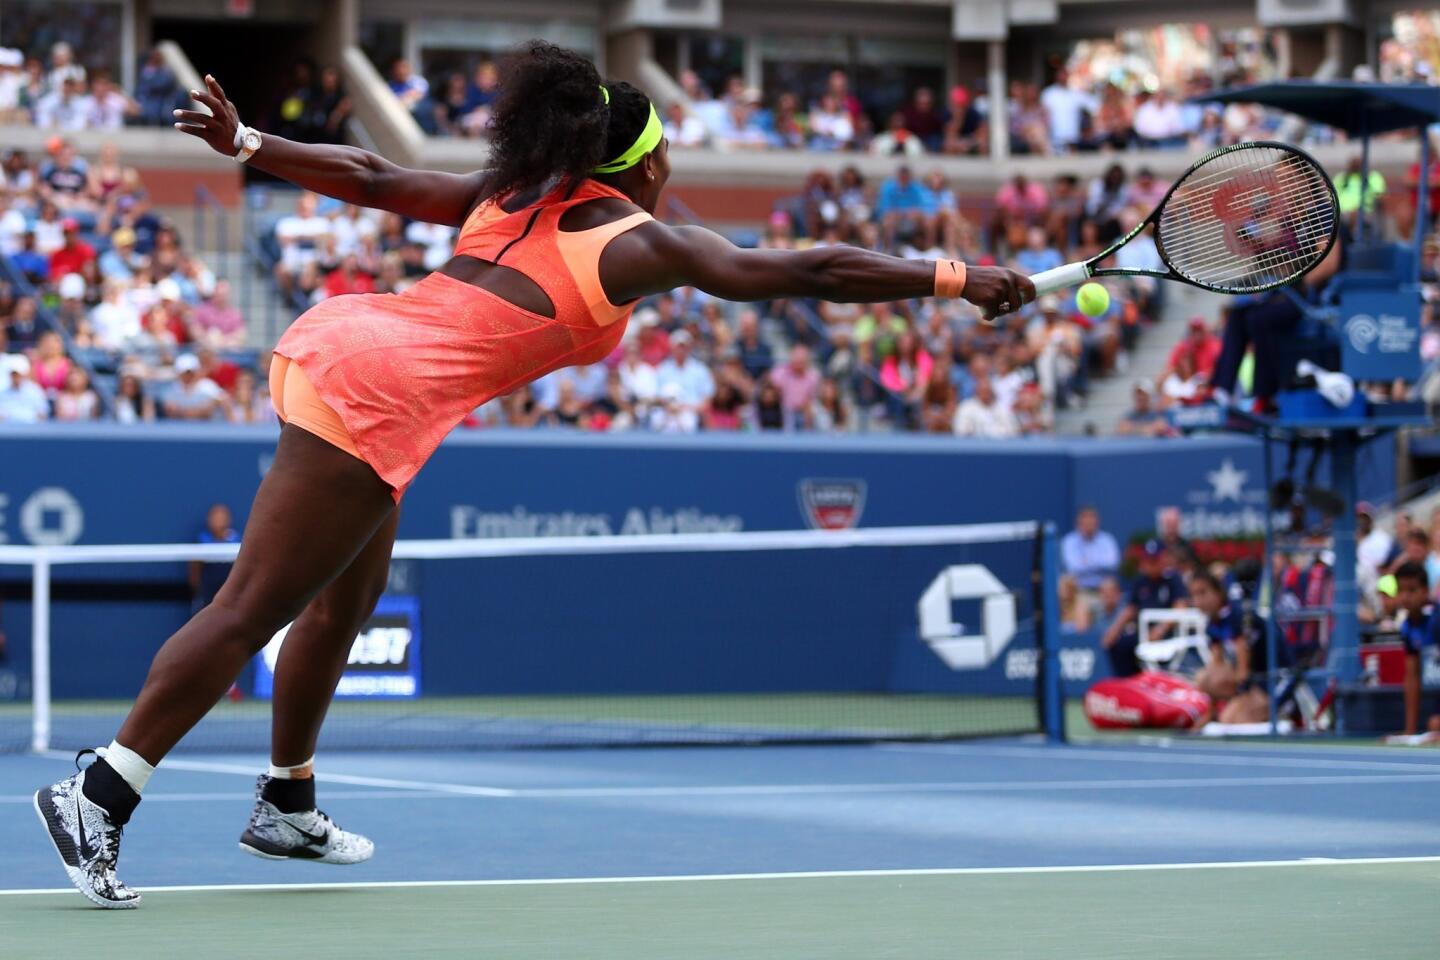 NEW YORK, NY - SEPTEMBER 06: Serena Williams of the United States returns a shot to Madison Keys of the United States during their Women's Singles Fourth Round match on Day Seven of the 2015 US Open at the USTA Billie Jean King National Tennis Center on September 6, 2015 in the Flushing neighborhood of the Queens borough of New York City. (Photo by Clive Brunskill/Getty Images) ** OUTS - ELSENT, FPG - OUTS * NM, PH, VA if sourced by CT, LA or MoD **